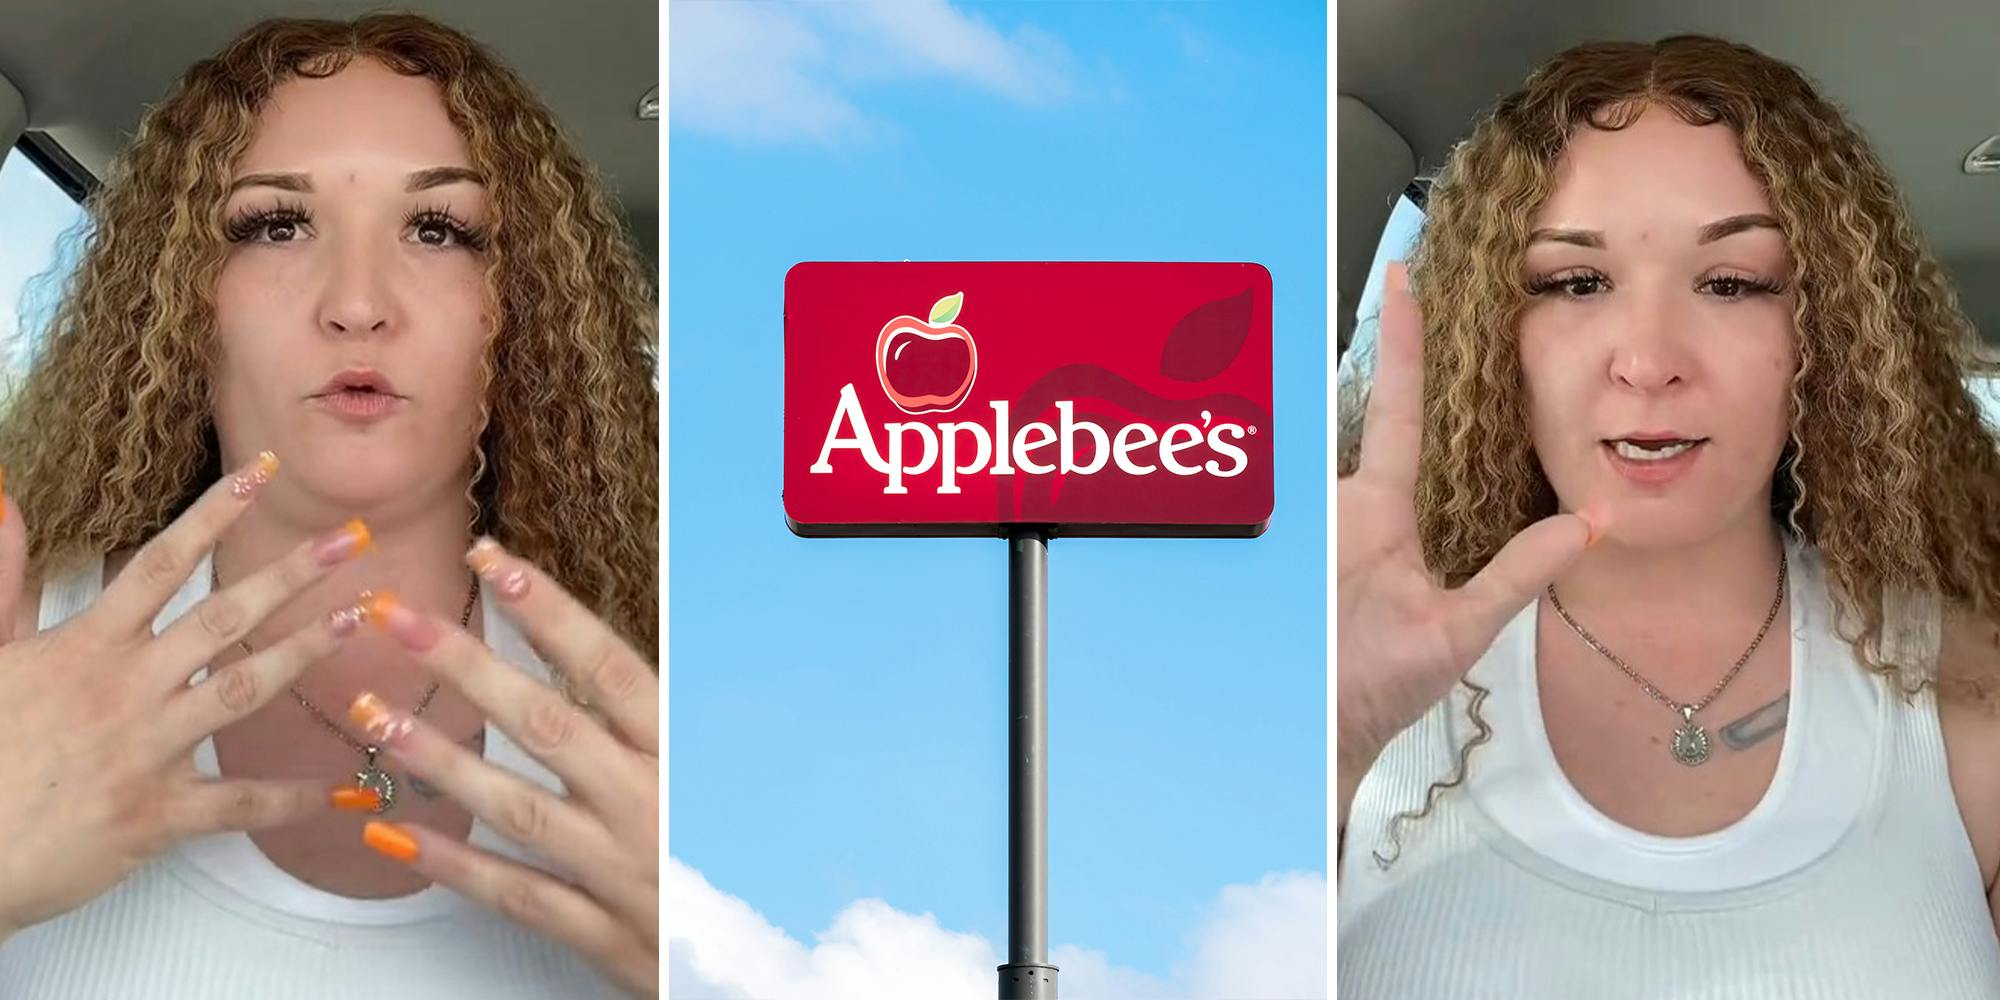 ‘Some people are so sick’: Applebee’s server says she was fired after table of 7 walked out on bill